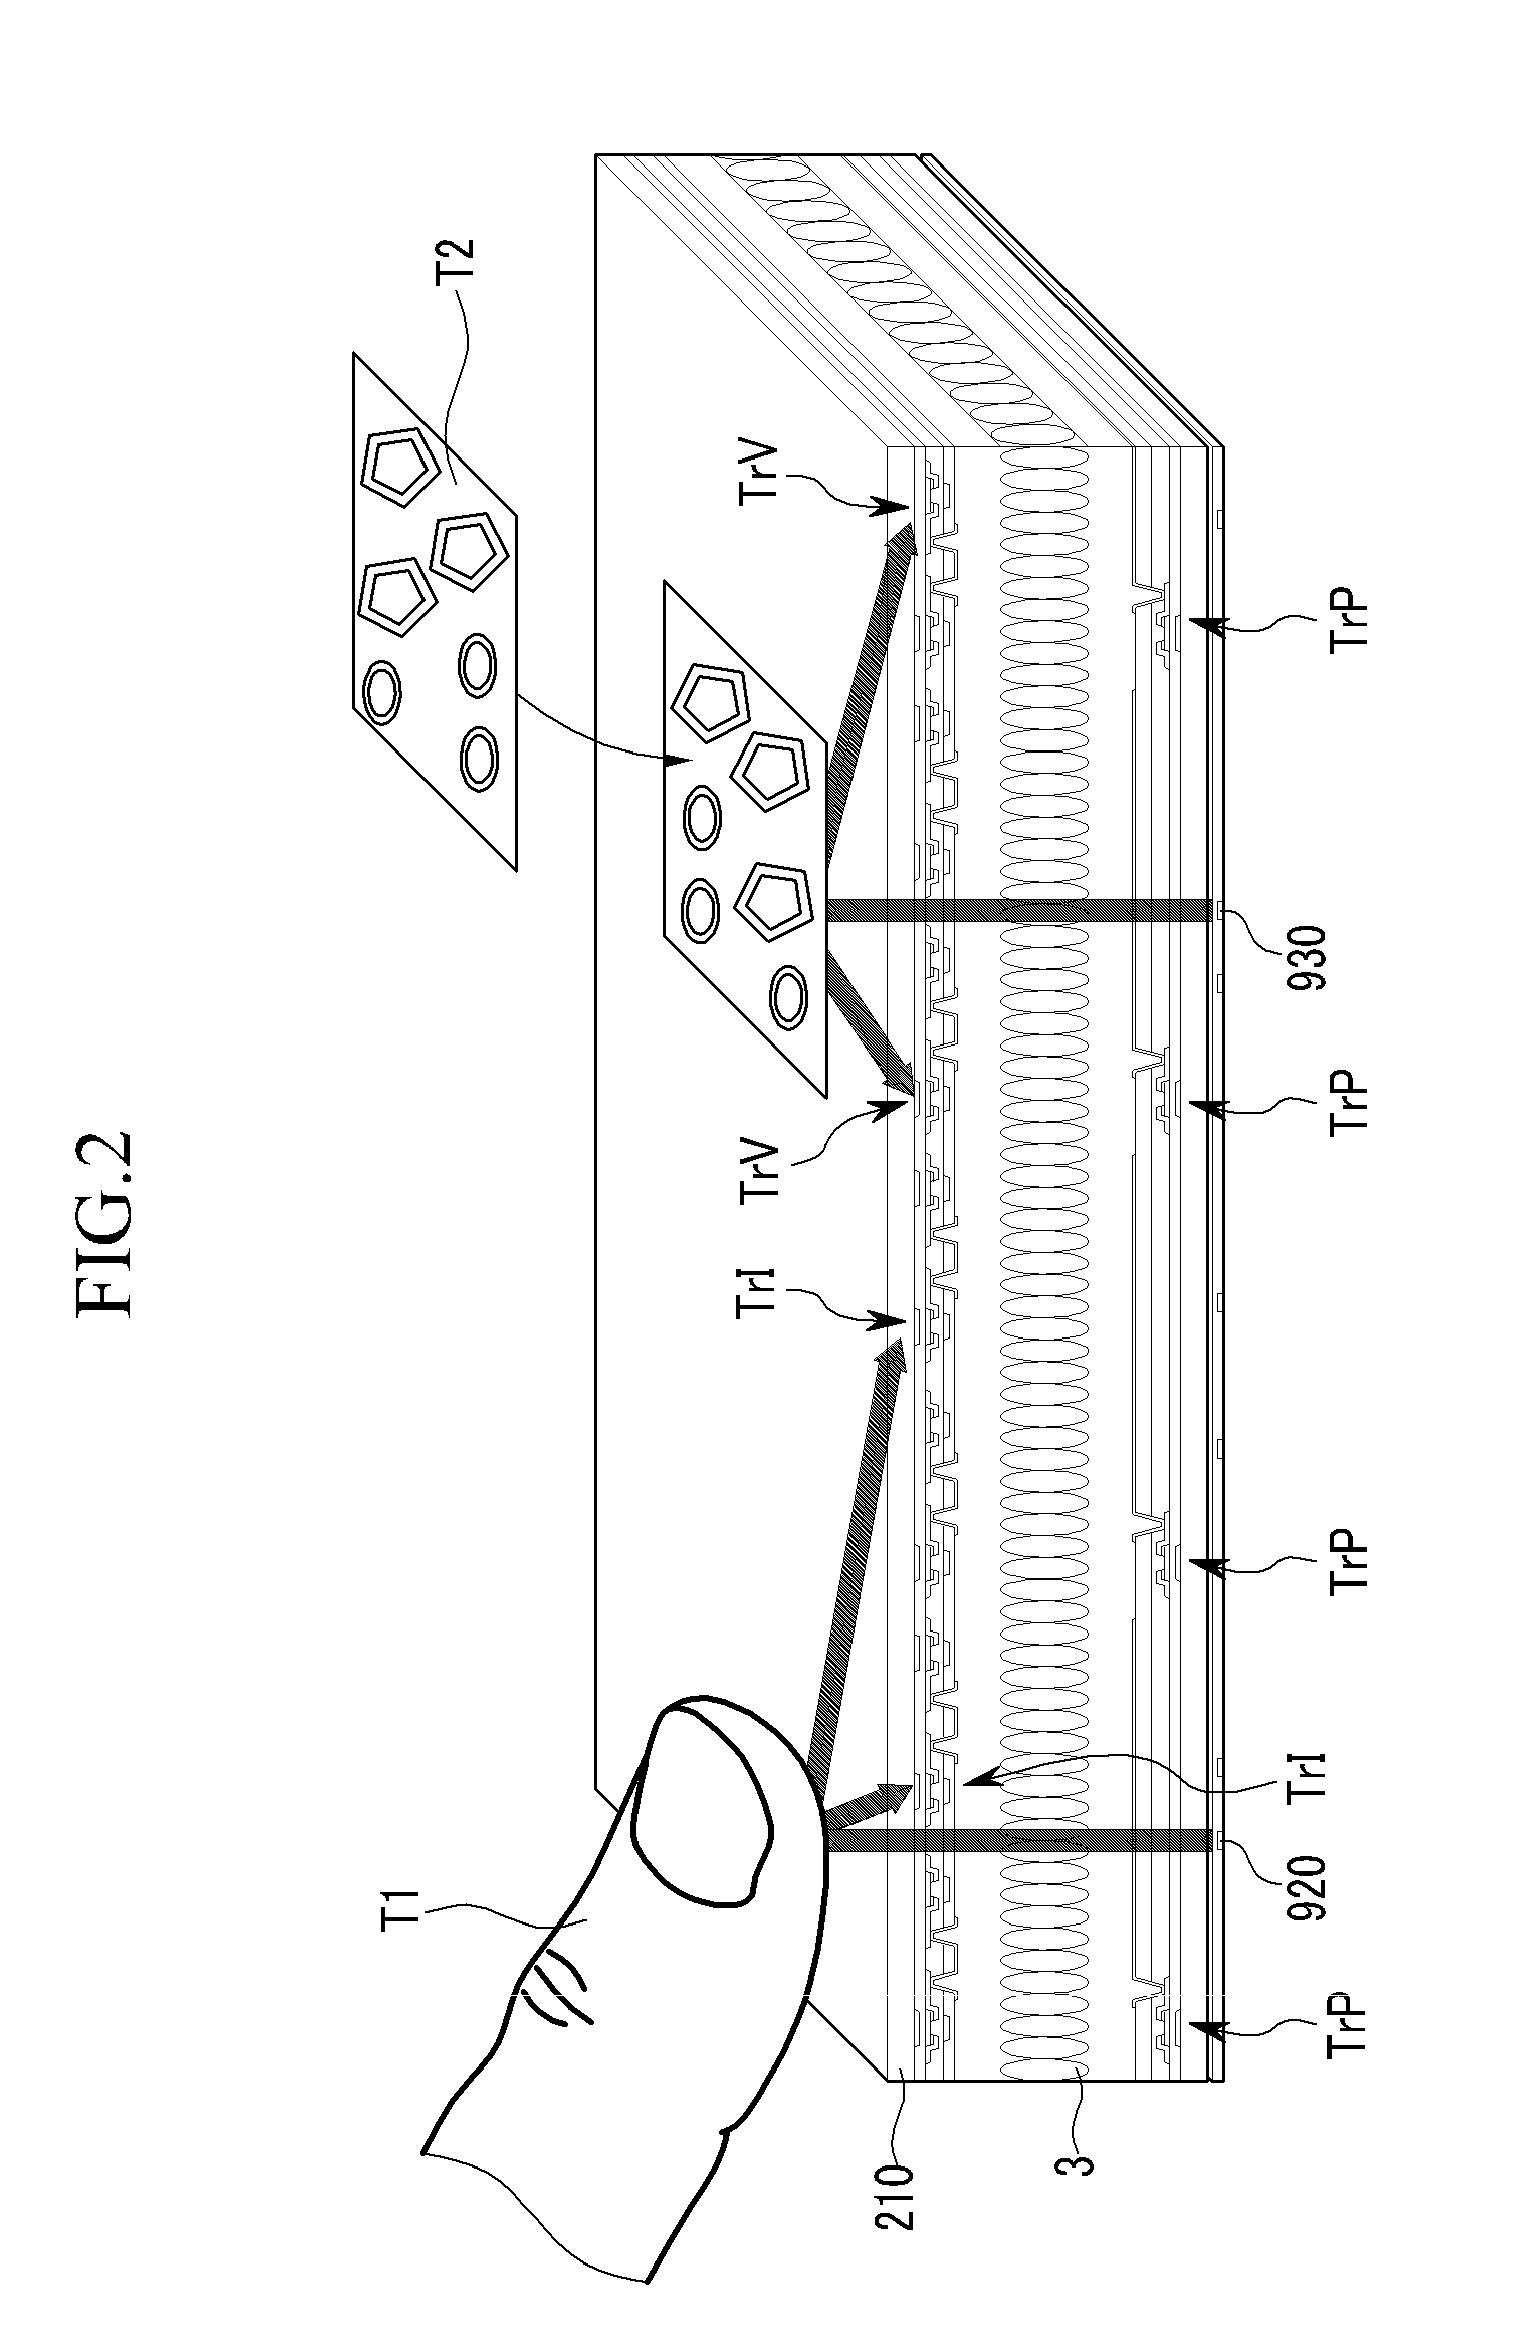 Display device with improved sensing mechanism